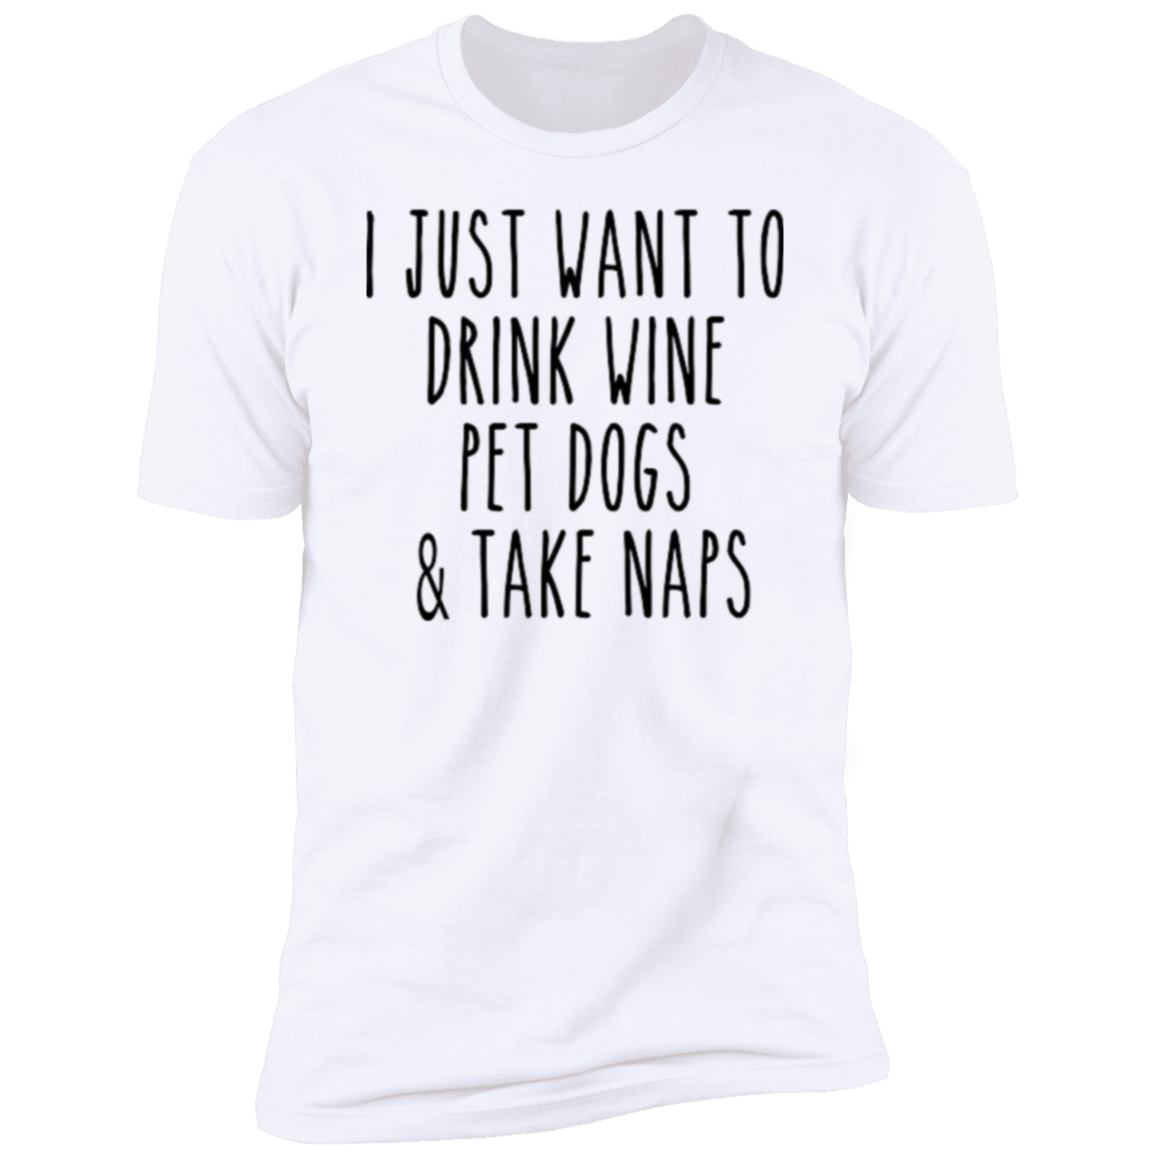 I just want to drink wine T-Shirt